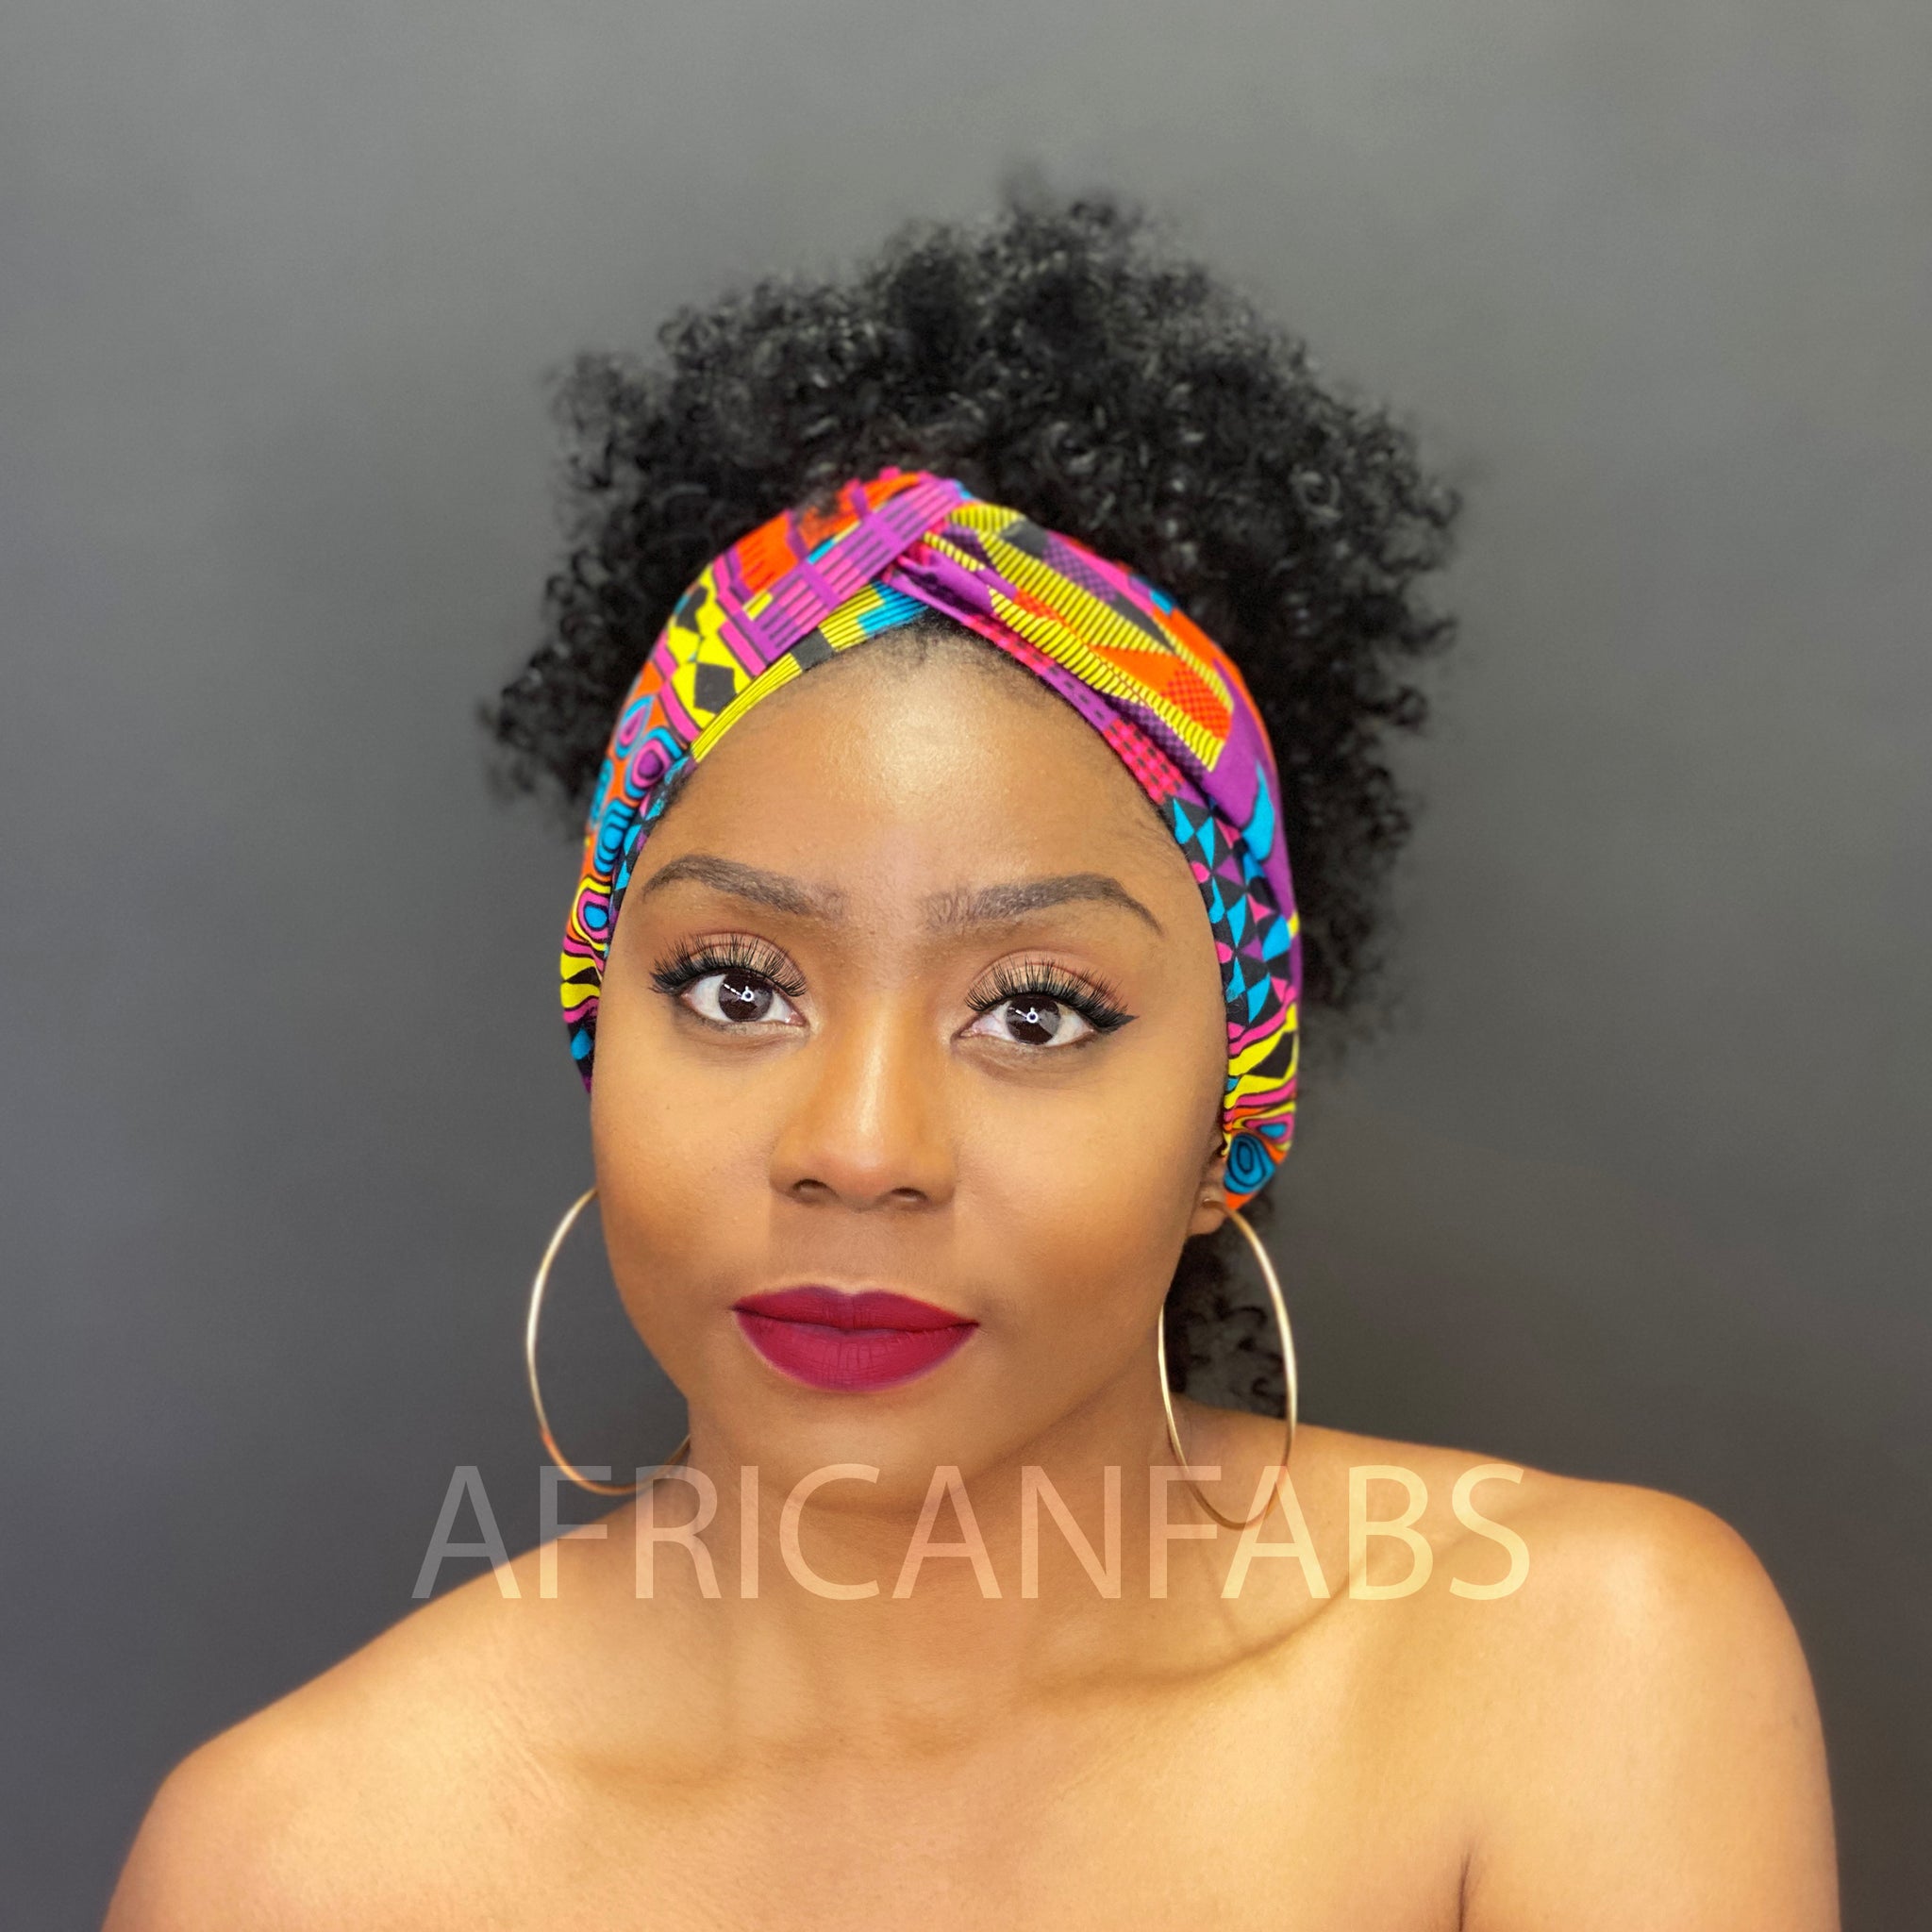 African print Headband - Adults - Hair Accessories - Multi color kente